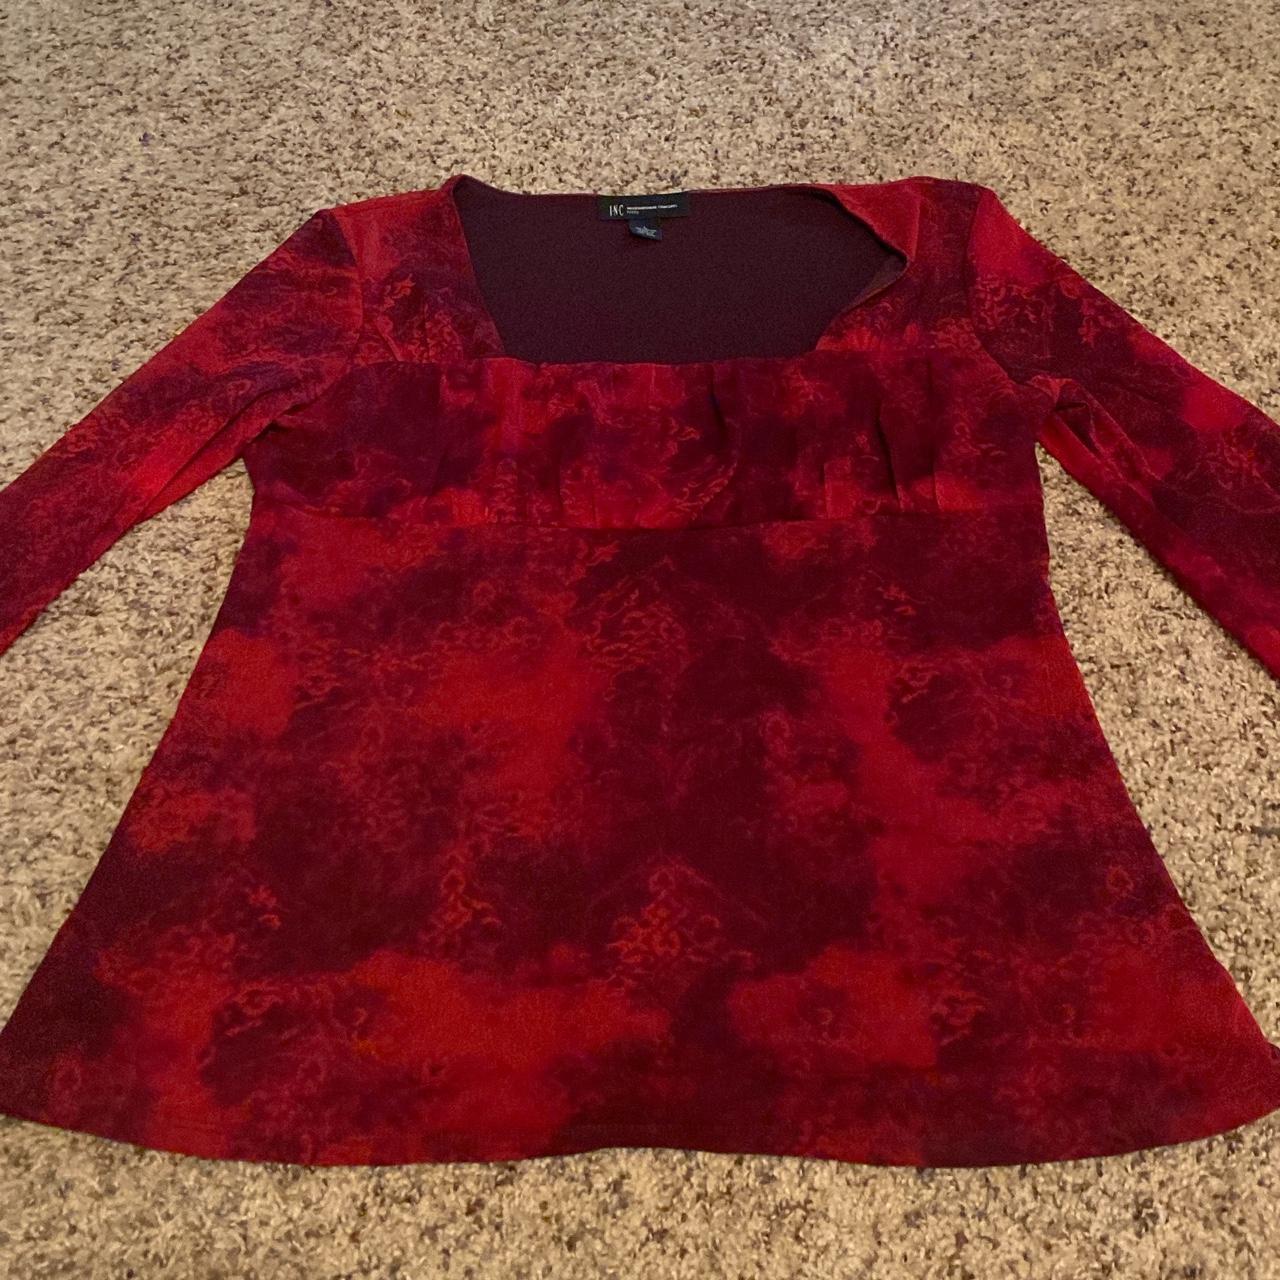 INC International Concepts Women's Red and Black Blouse